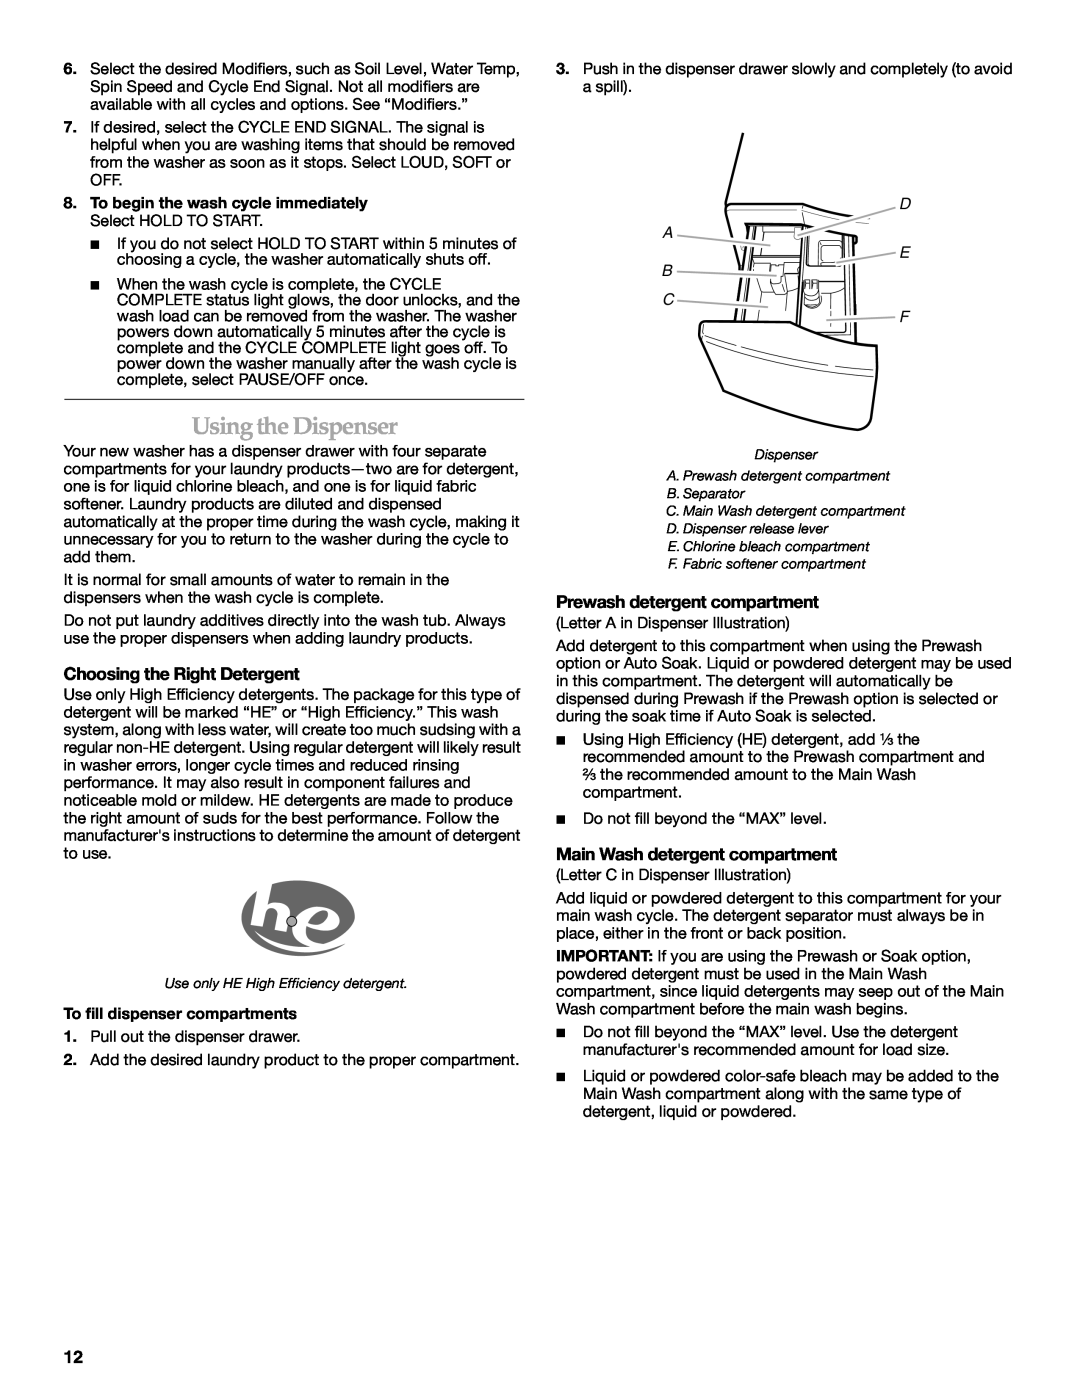 Maytag 8182969 manual Using the Dispenser, Choosing the Right Detergent, Prewash detergent compartment, D A E B C F 